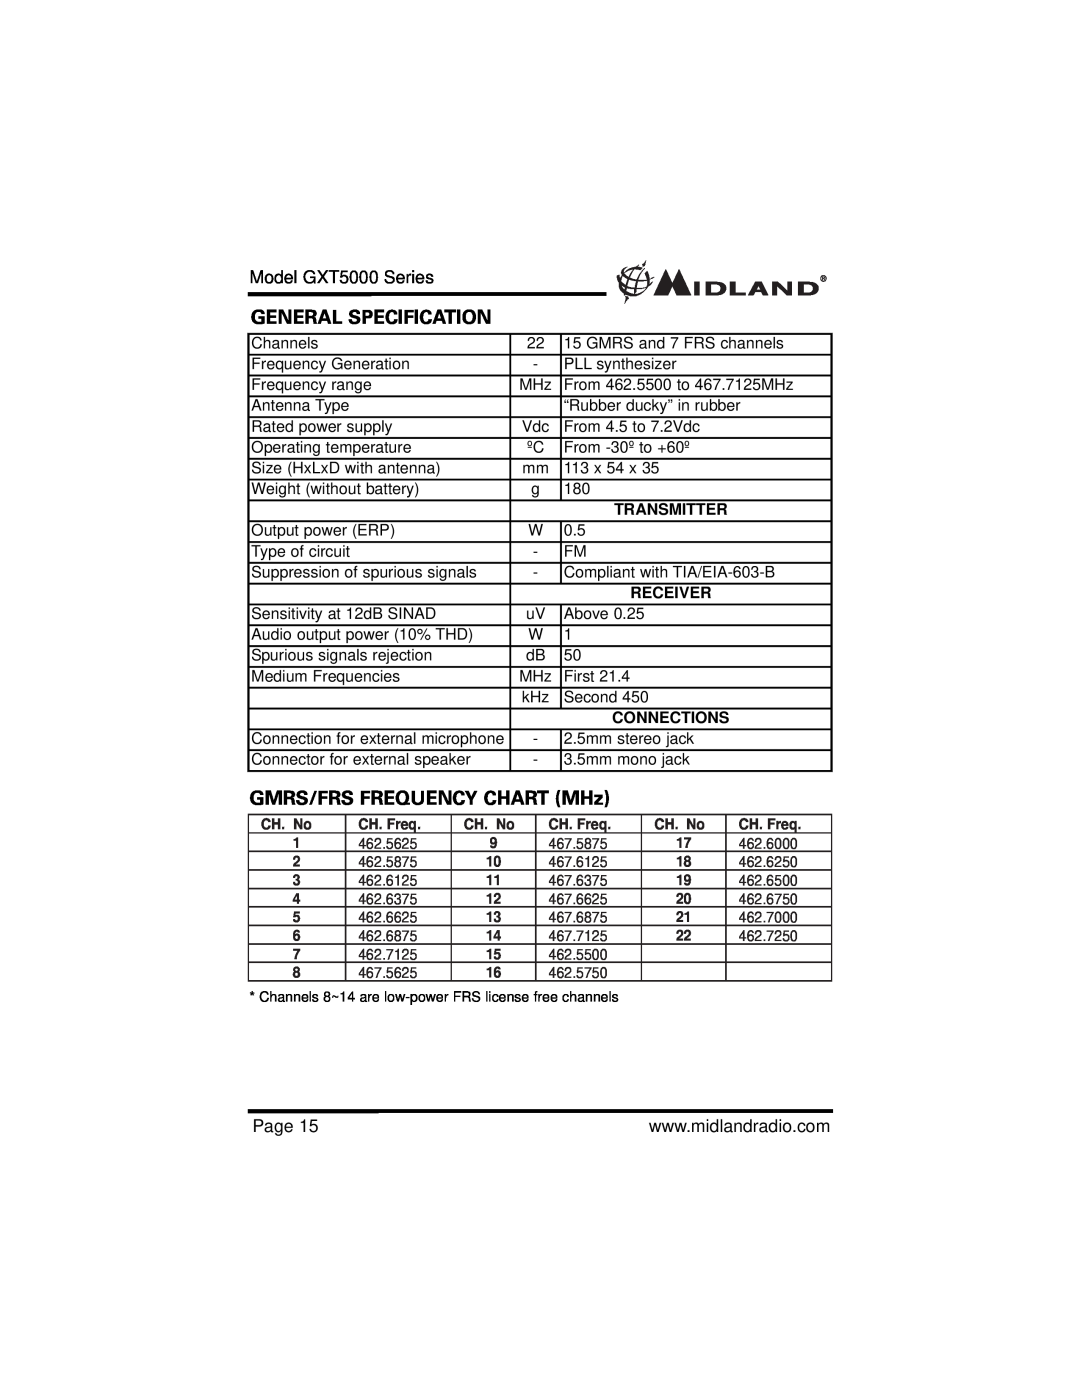 Midland Radio GXT5000 General Specification, GMRS/FRS FREQUENCY CHART MHz, Transmitter, Receiver, Connections 